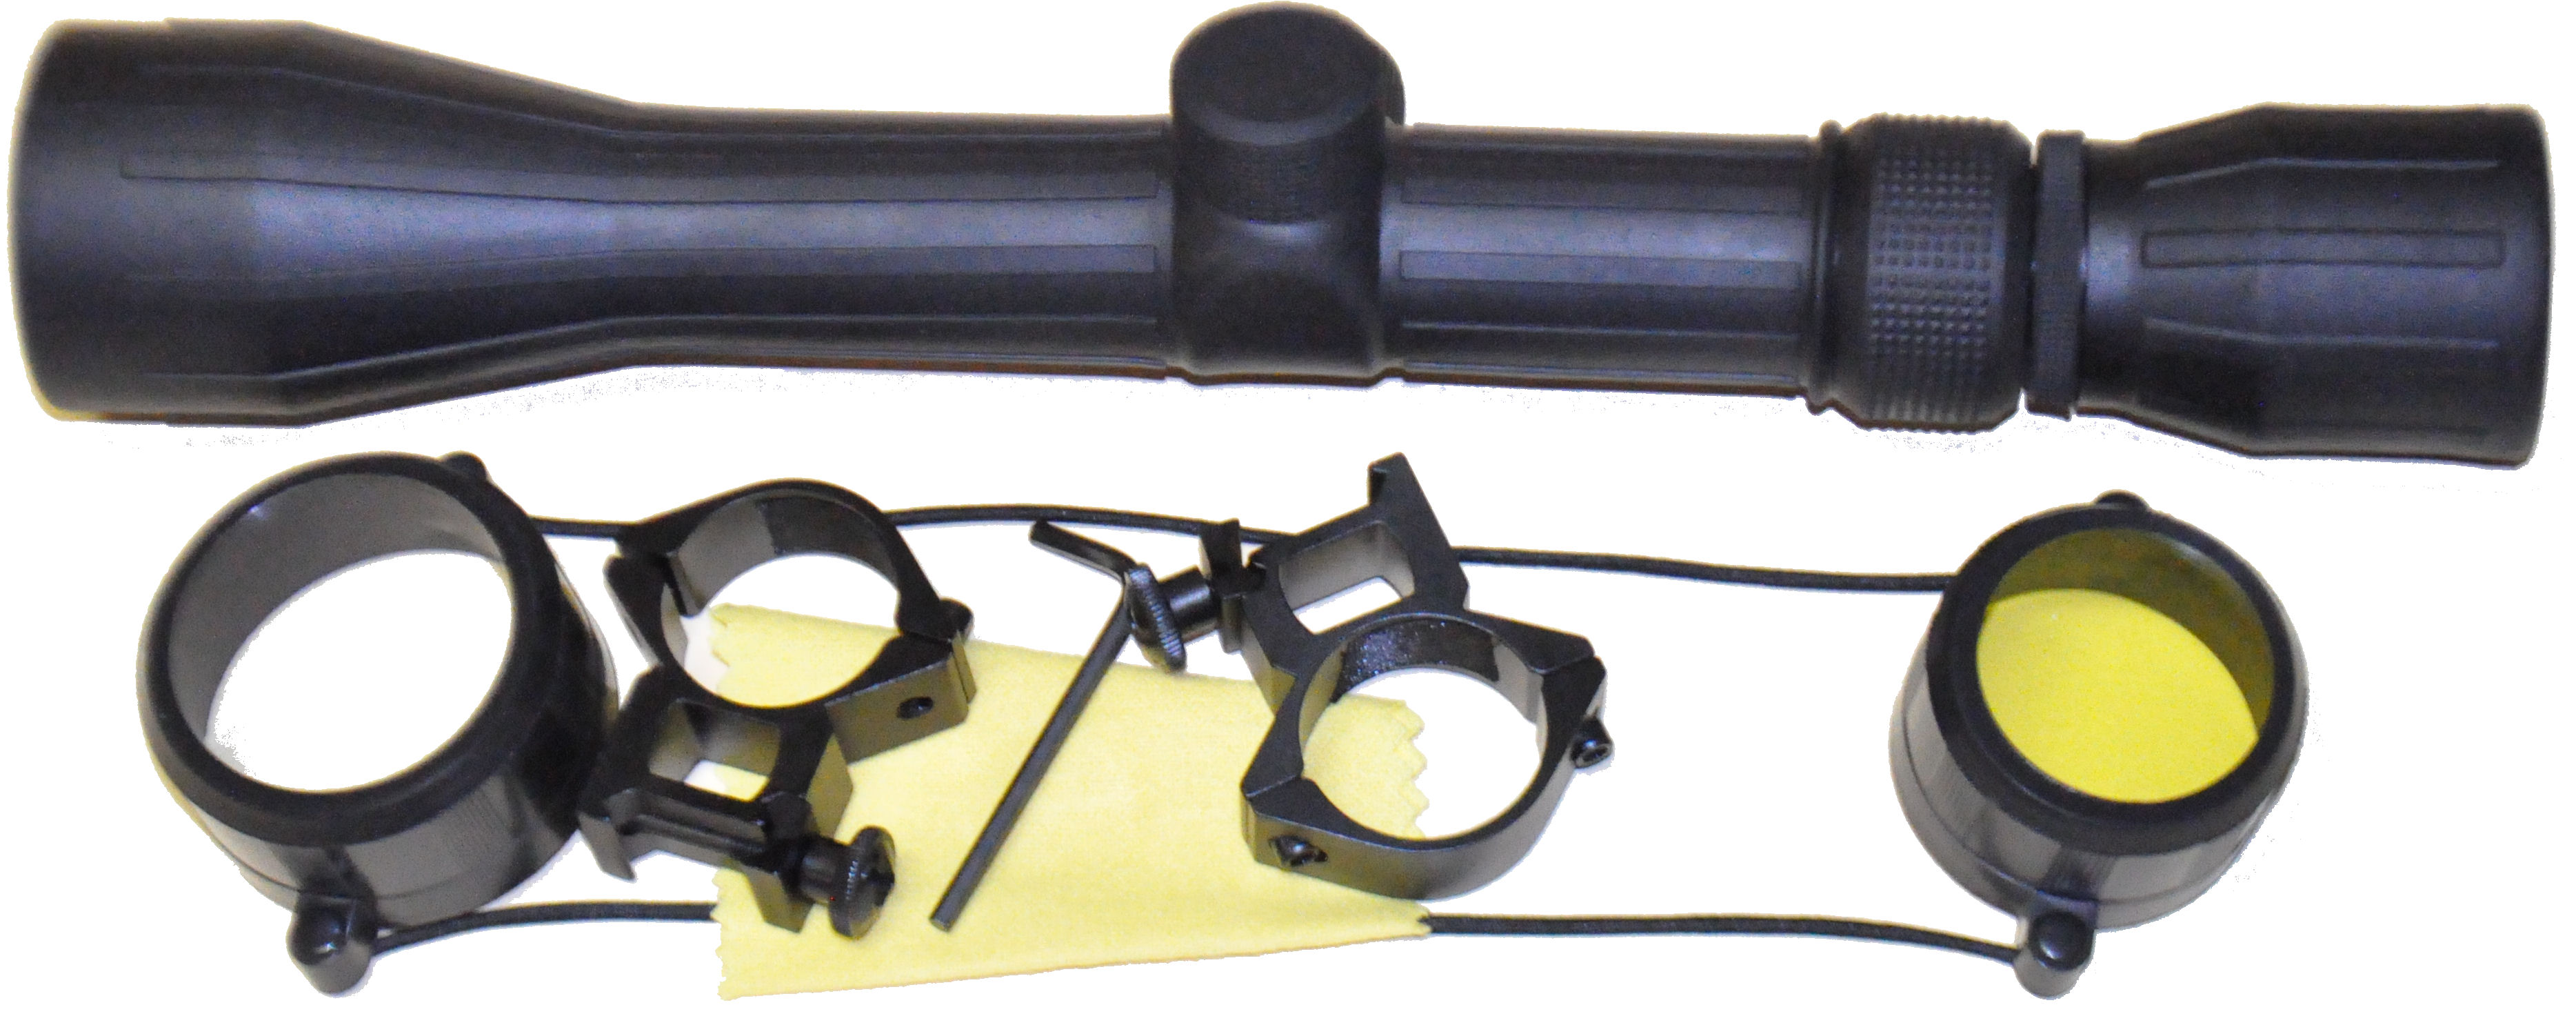 3-9X40 30mm Armoured Scope with mounts